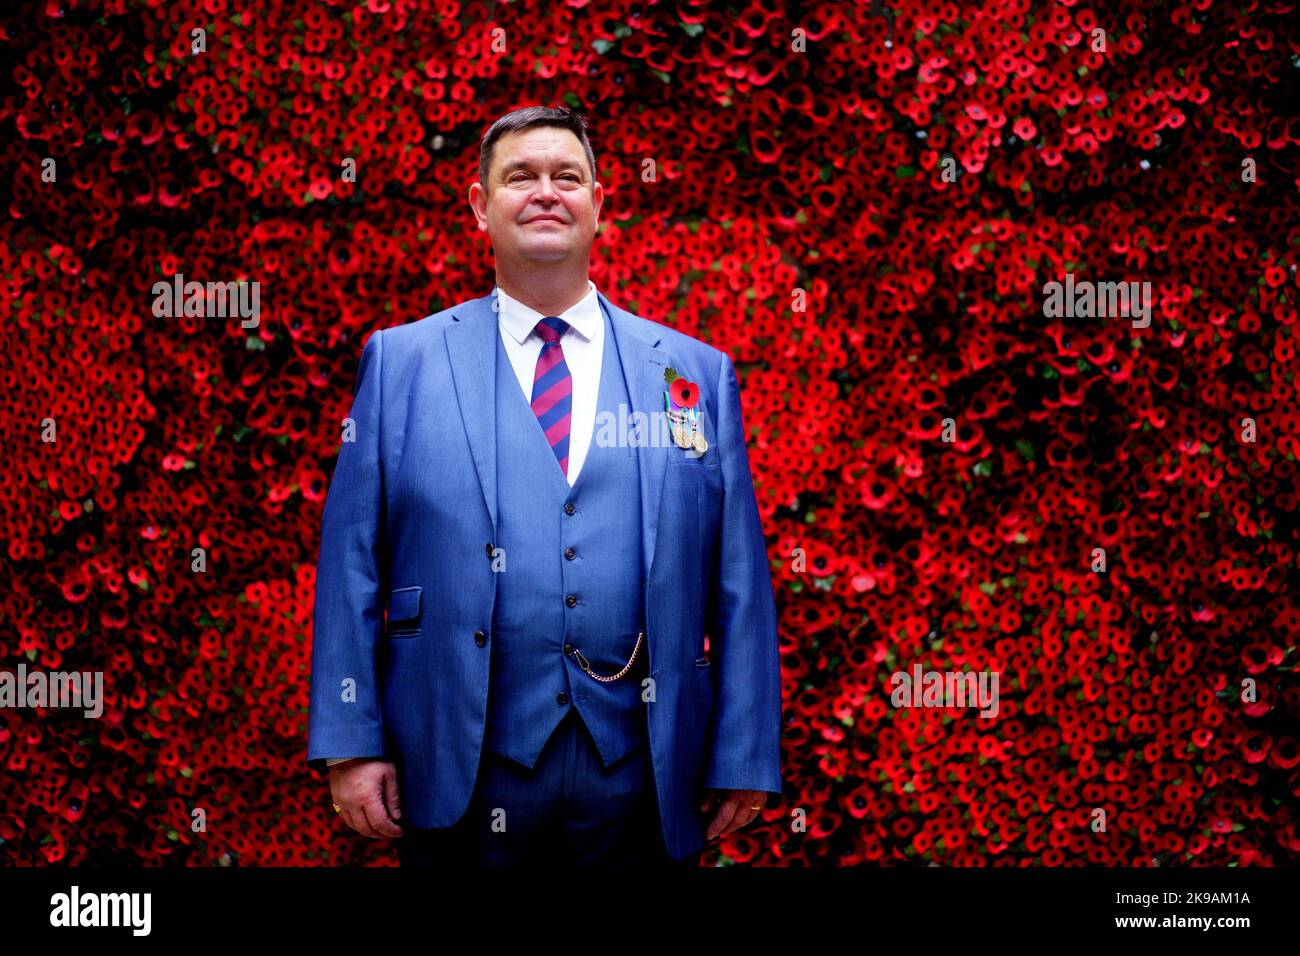 Army Veteran Clive Jones, whose story is among those featured on the giant poppy wall, during the launch of The Royal British Legion 2022 Poppy Appeal, at Hay's Galleria in central London. Members of the public will be invited to take a paper poppy from the wall and uncover the stories of members of the Armed Forces community who have received help from the Royal British Legion. Picture date: Thursday October 27, 2022. Stock Photo